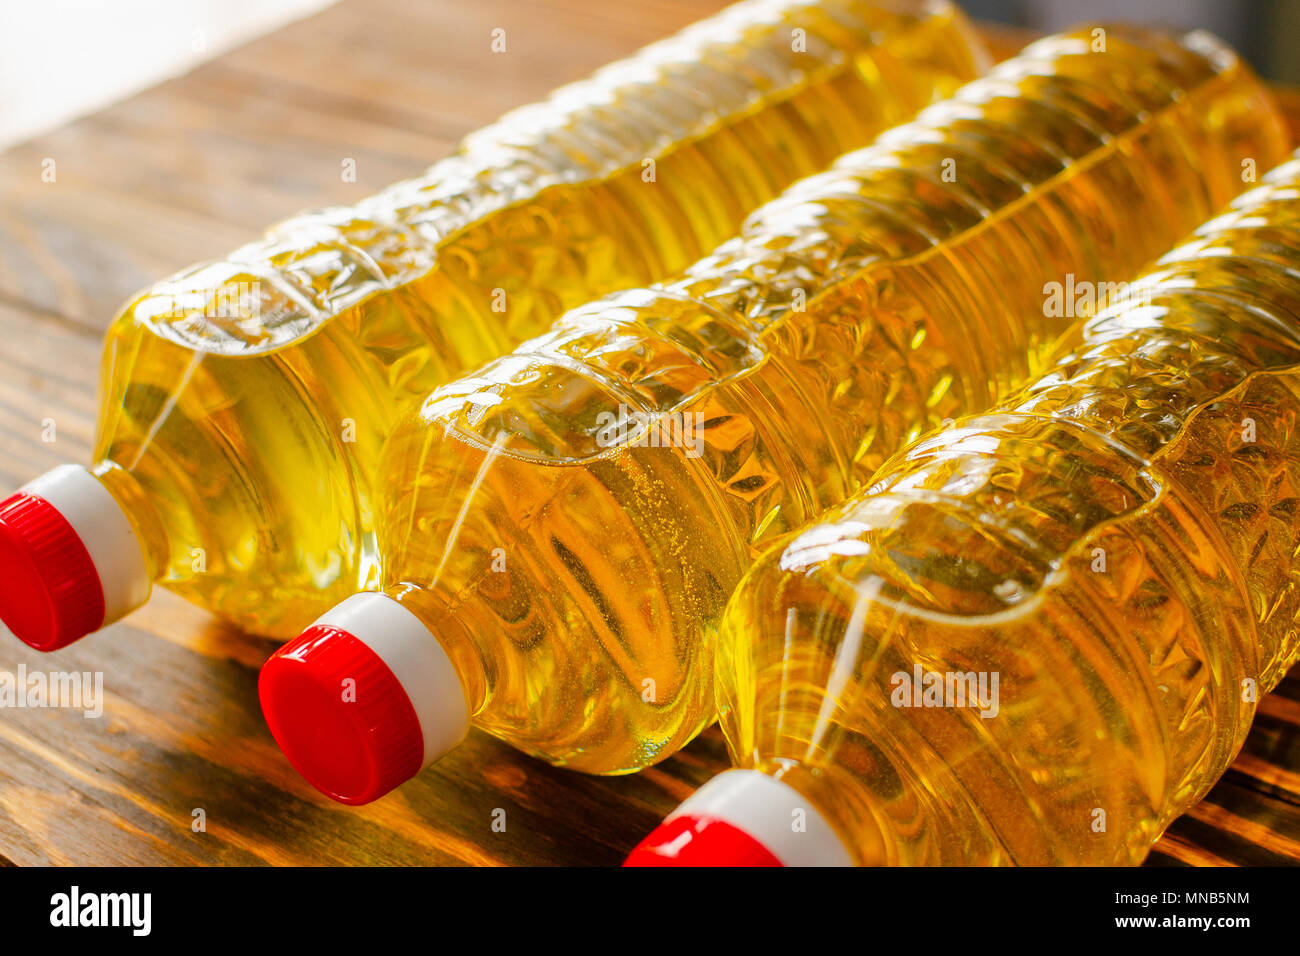 Sunflower oil. Olive oil. Bottles with butter on a wooden table. Stock Photo